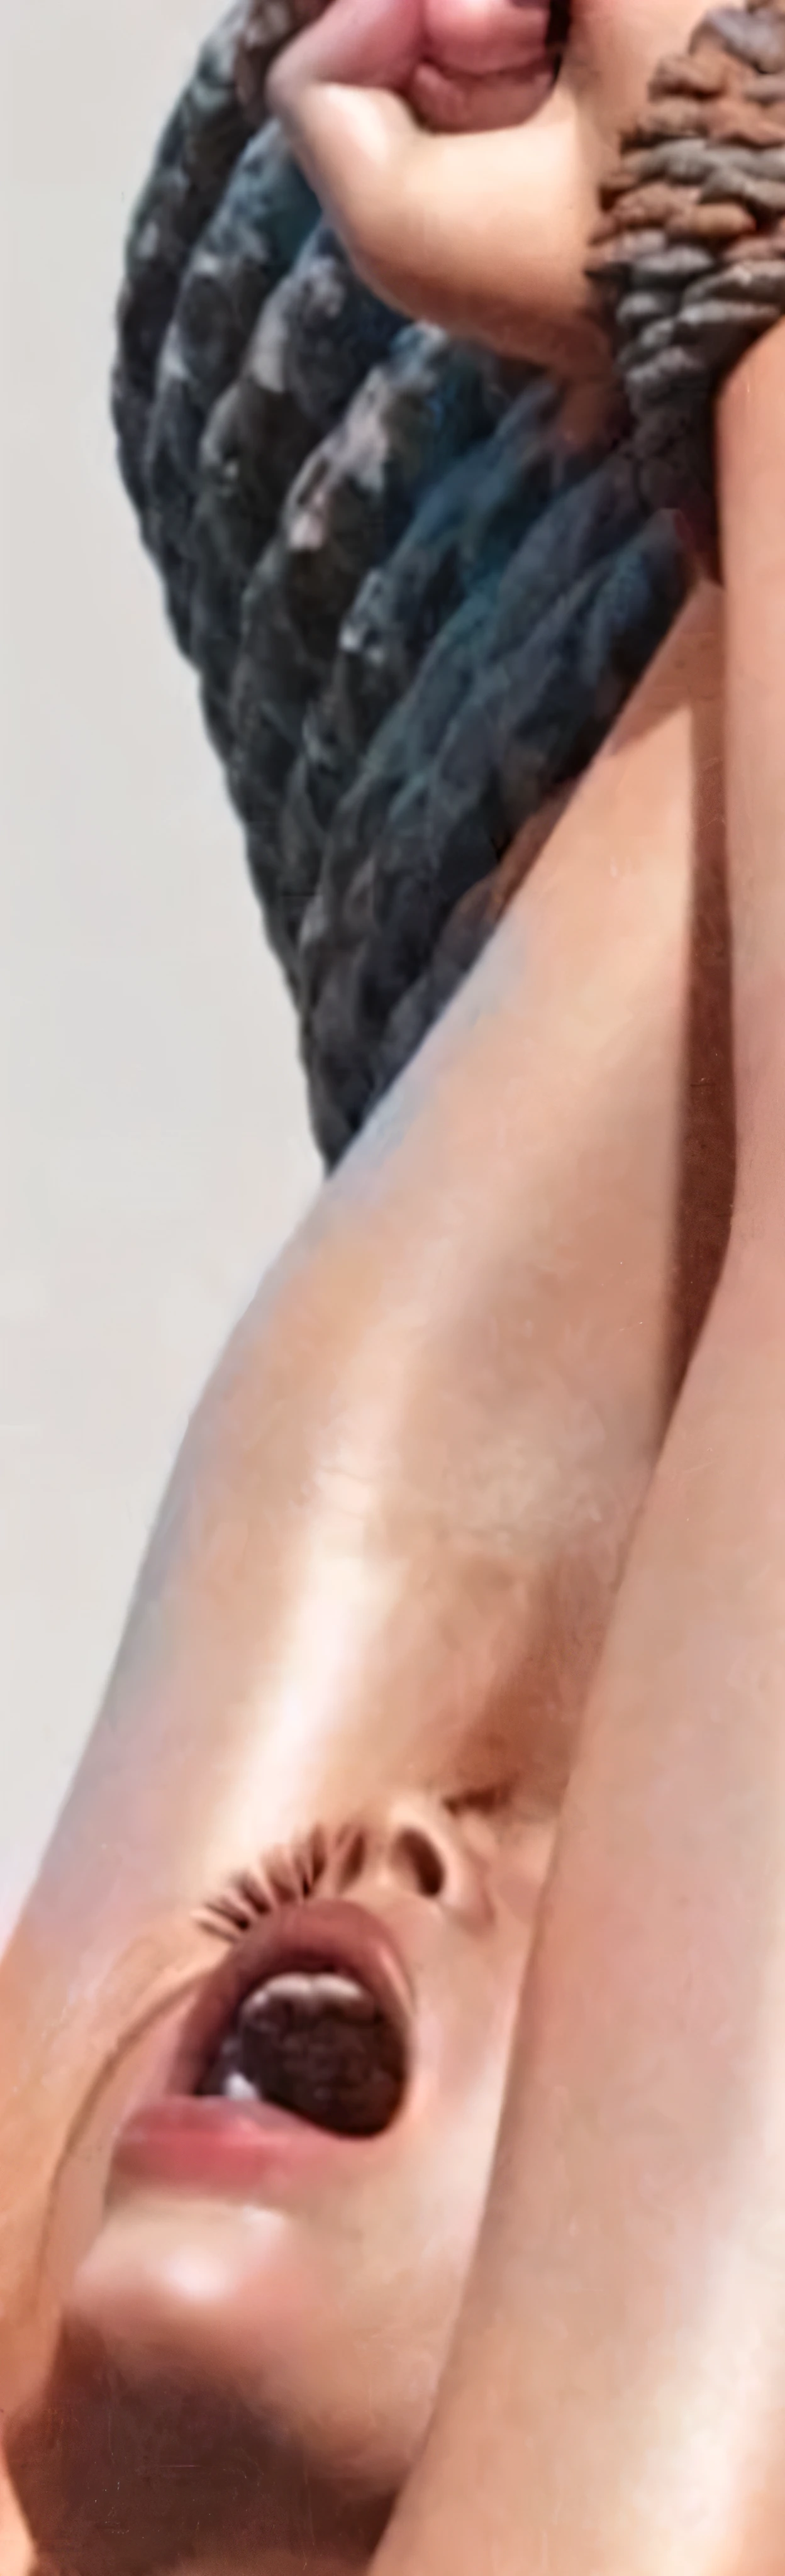 there is a woman with hands tied up, neck zoomed in, closeup of arms, upper body close - up, upper body close up, skinny upper arms, zoomed out shot, close up half body shot, neck zoomed in from lips down, detailed arms, smooth tan skin, armpit,a close up of a woman ,photorealistic skin texture, detailed unblurred face, close up at face, close up of face, realistic skin texture, realistic textured skin, ultra high detail ultra realism, hyperdetailed skin, closeup on face, 8 k pores,UHD, closeup of face, neck zoomed in from lips down